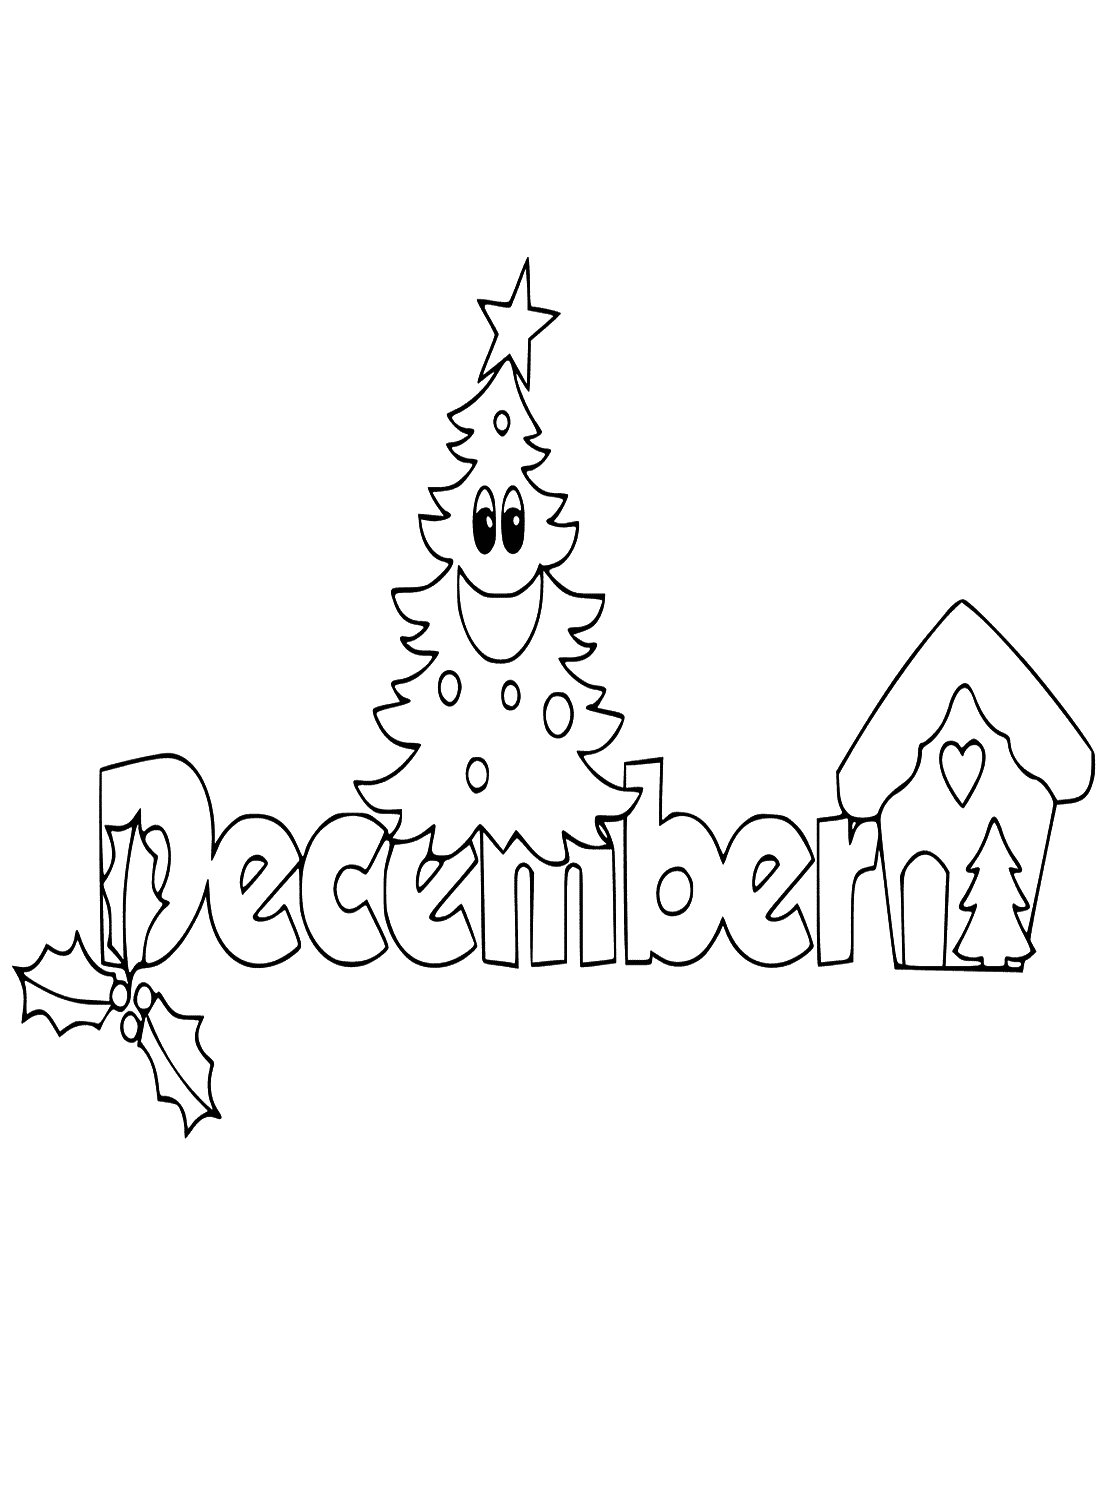 December With Christmas Tree Coloring Pages